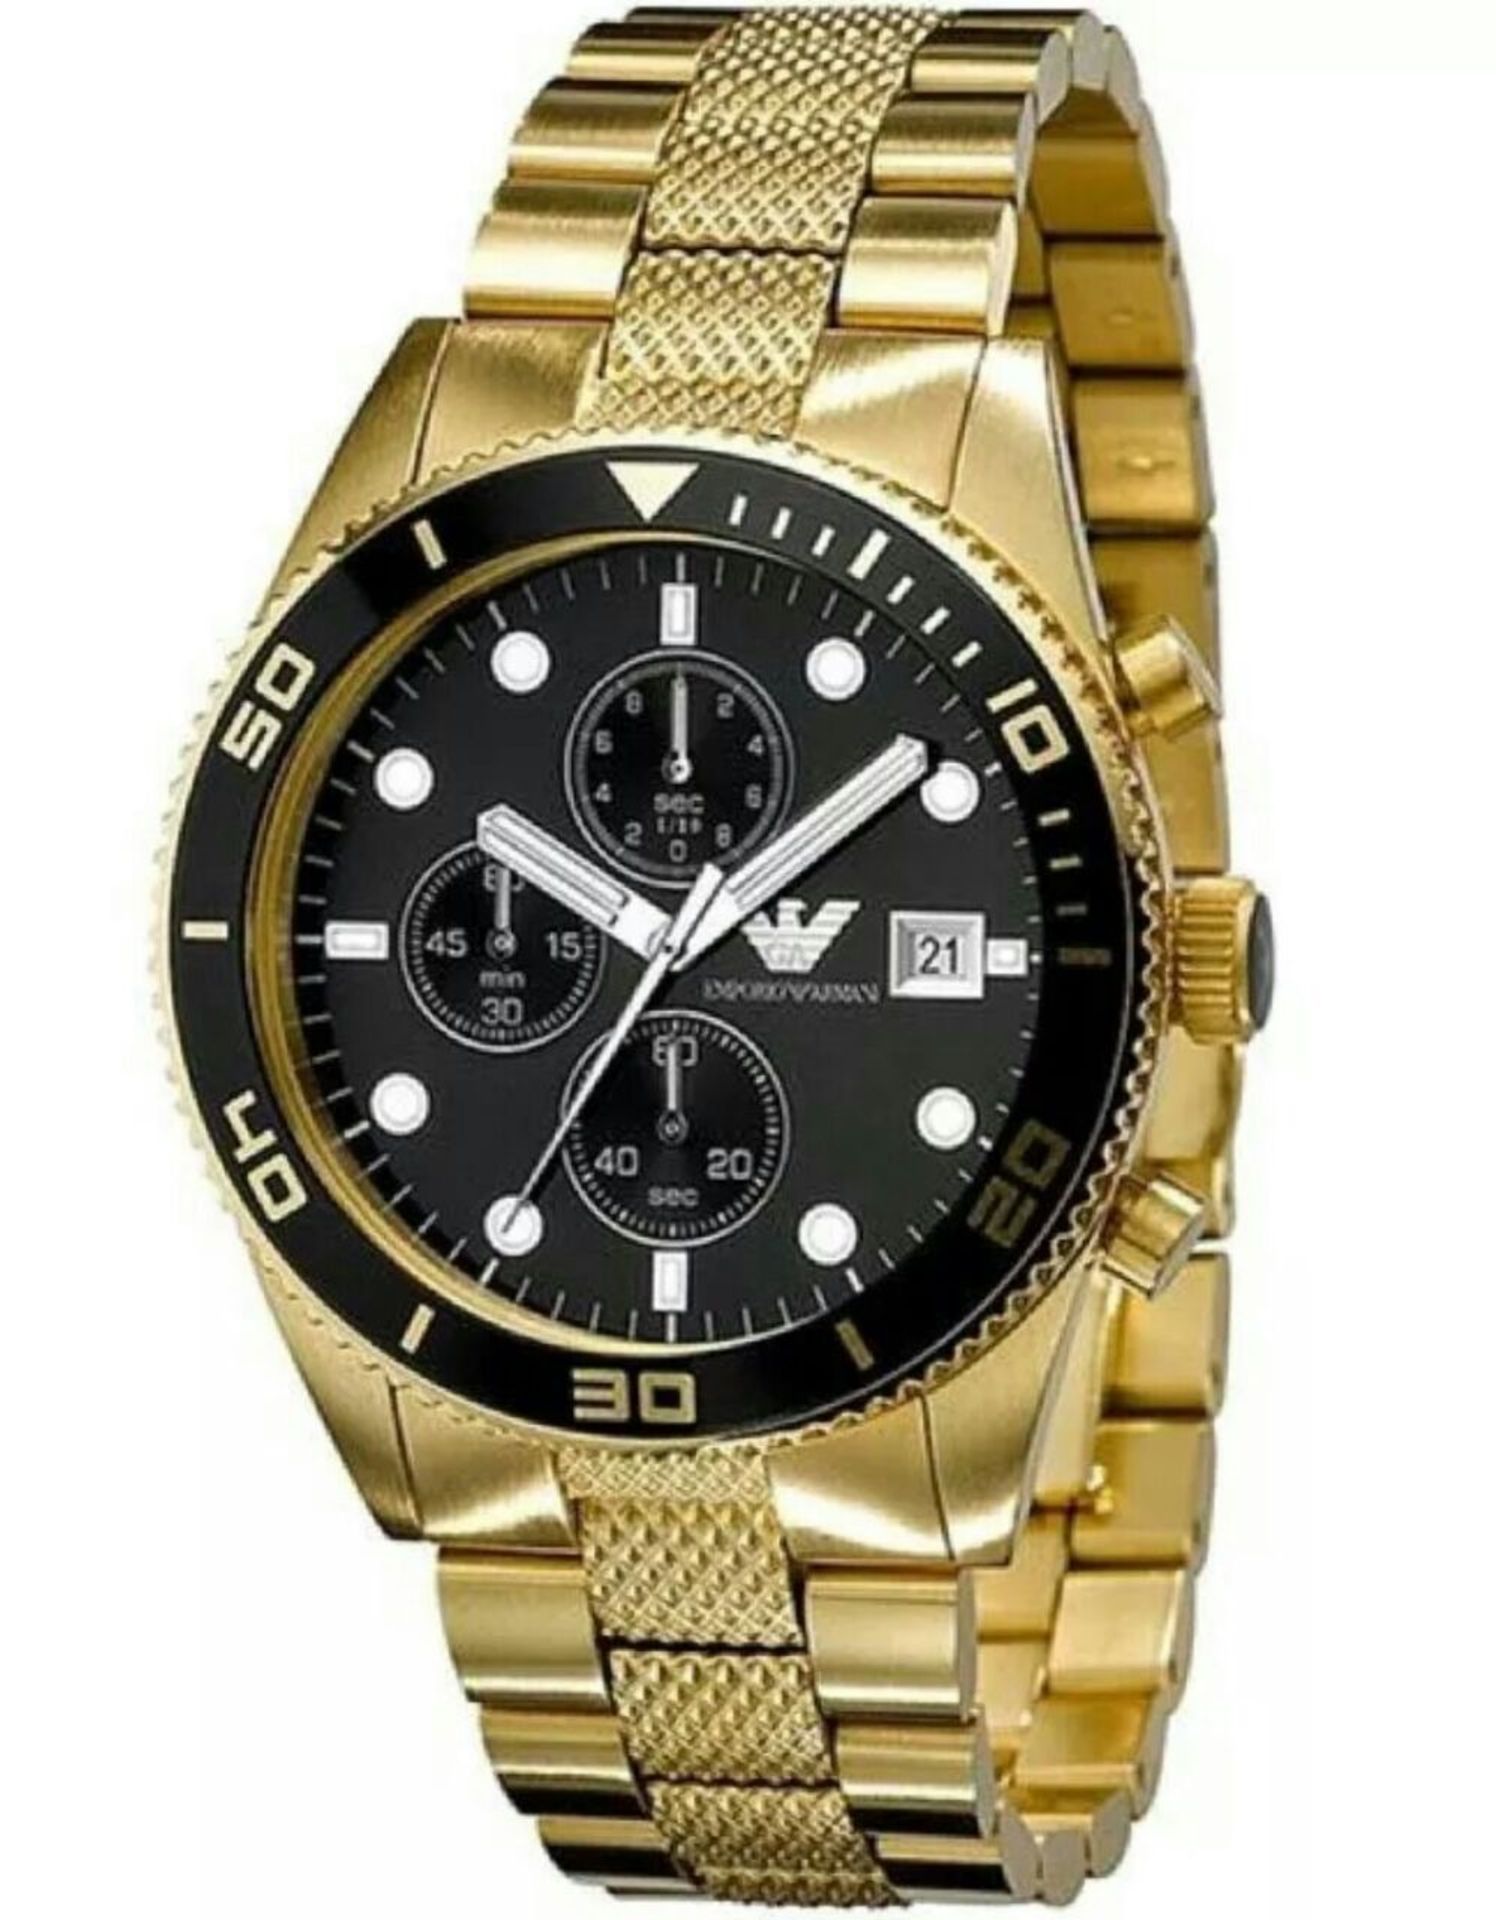 BRAND NEW GENTS EMPORIO ARMANI AR5857, GOLD TONE BRACELET WATCH WITH ARMANI WATCH BOXES, MANUAL &